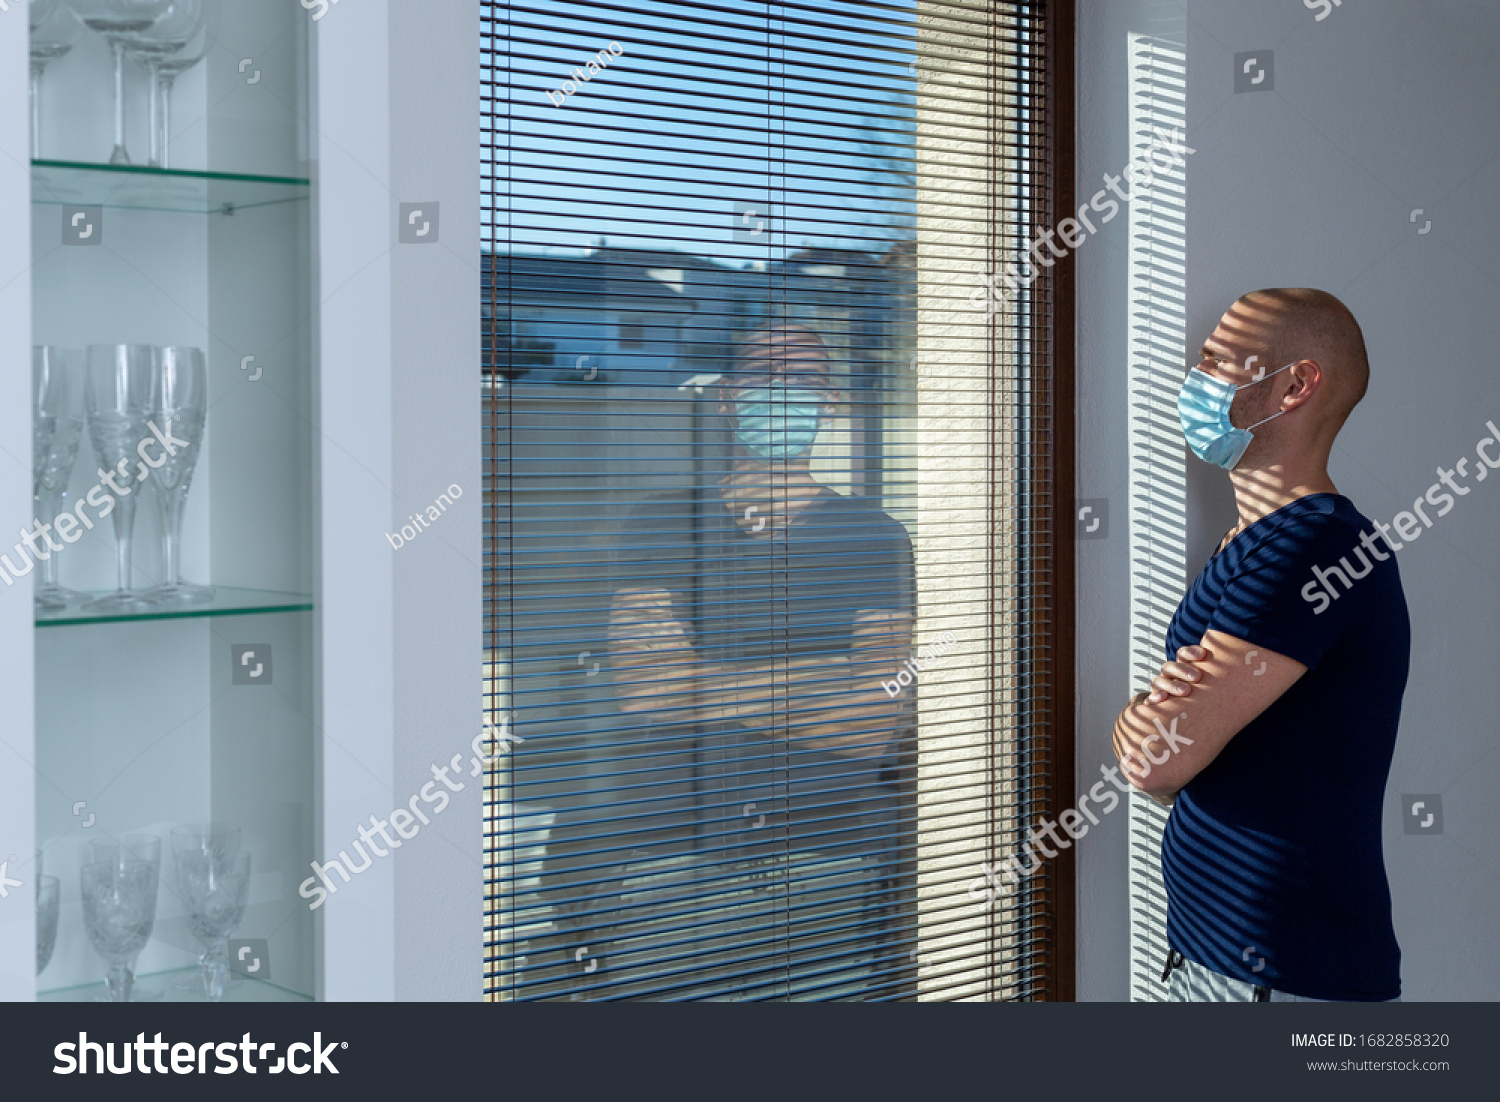 Home quarantine (self-isolation) because of the Coronavirus disease (COVID-19). Infected man with the ear-loop mask on his face looks out of the window. Man with protective face mask. Infection theme. #1682858320